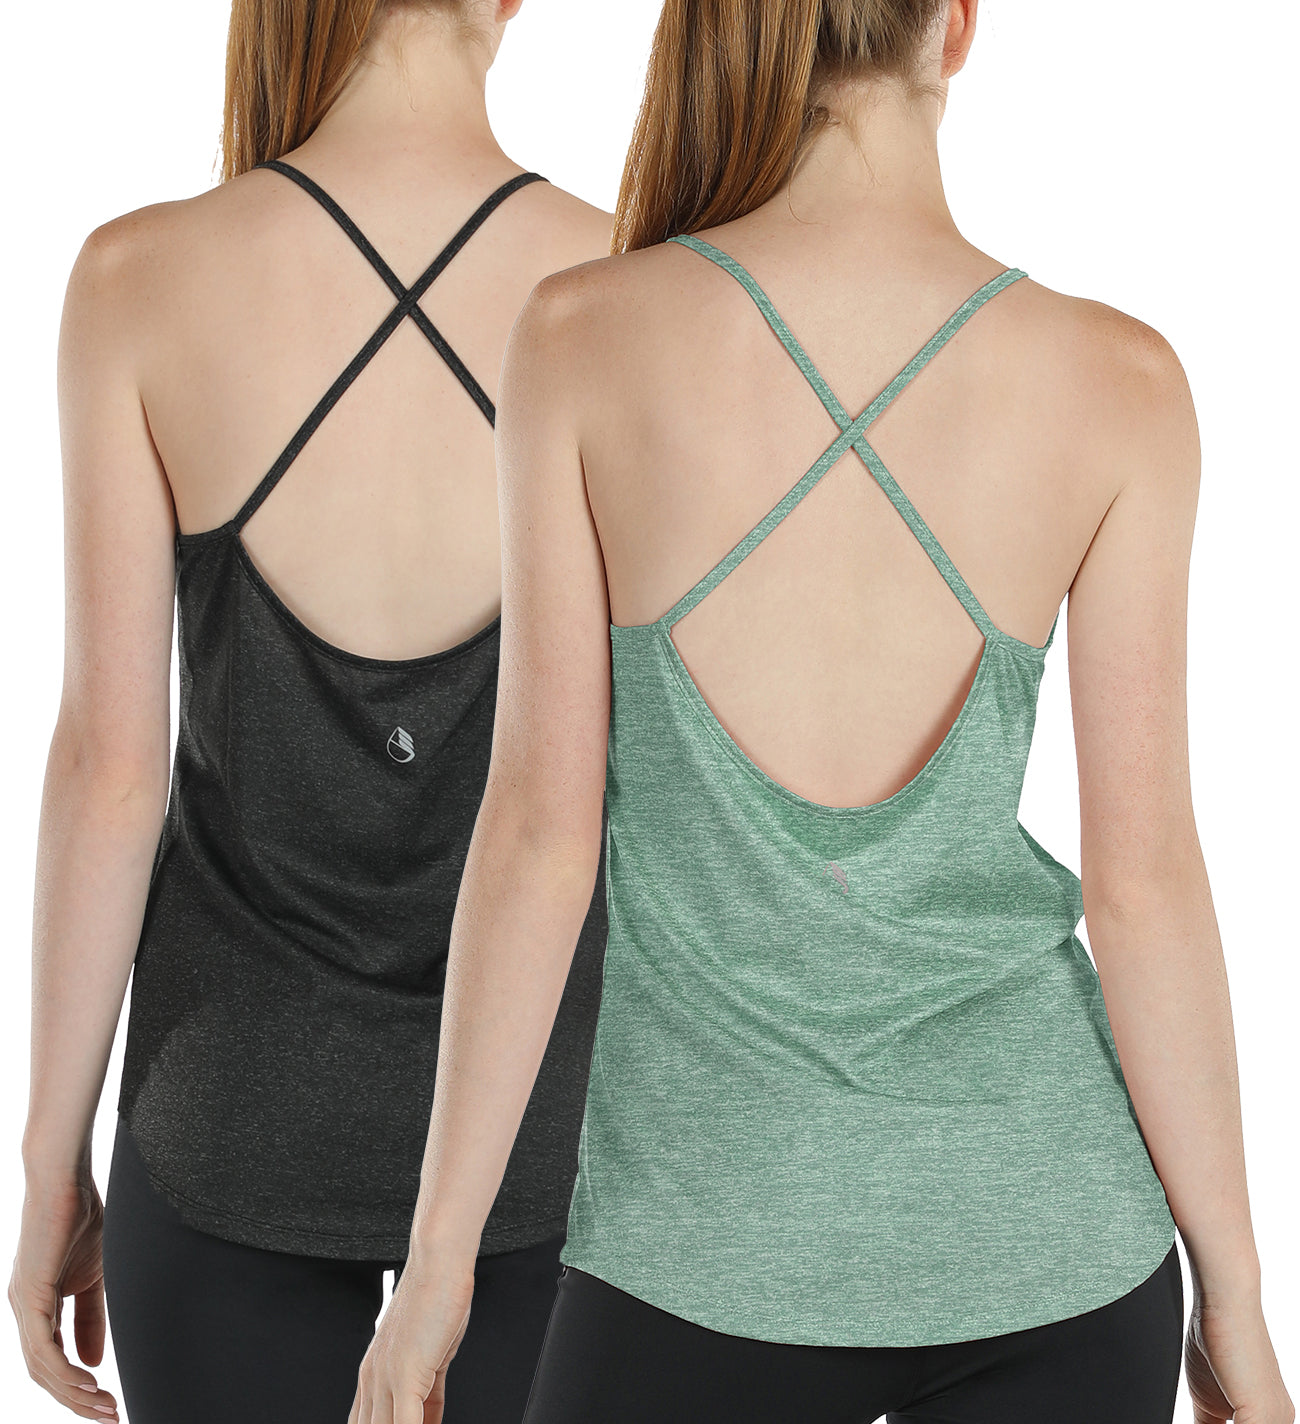 Women's Yoga Backless Strappy Fitness Top Quick drying Sweat